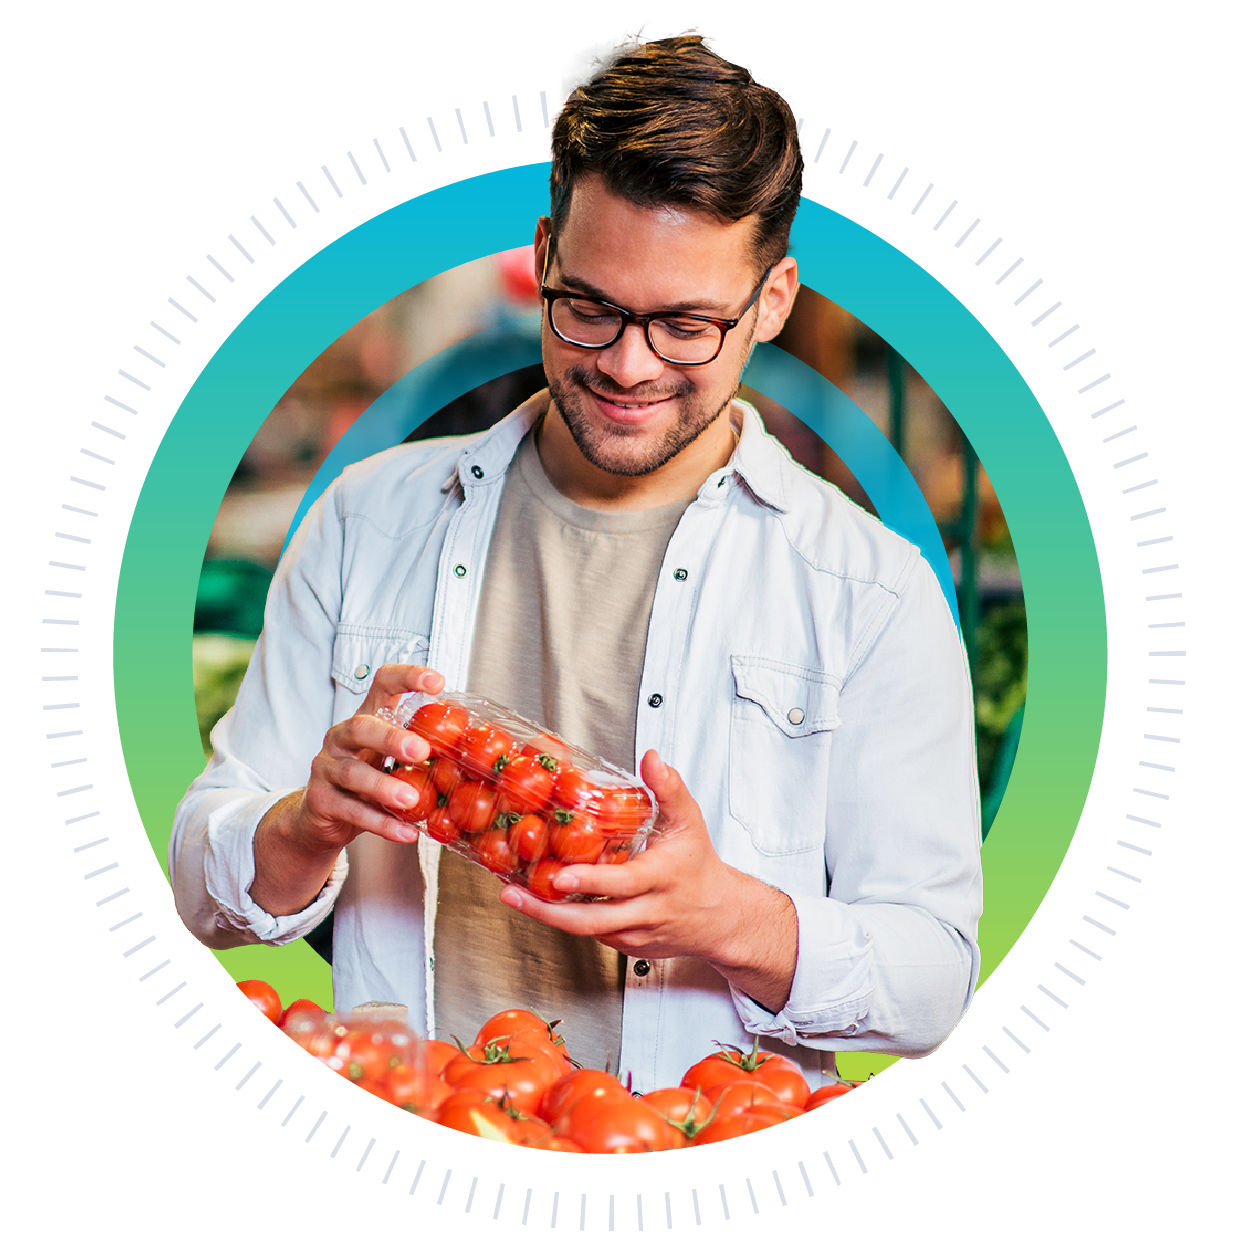 consumer with tomatoes